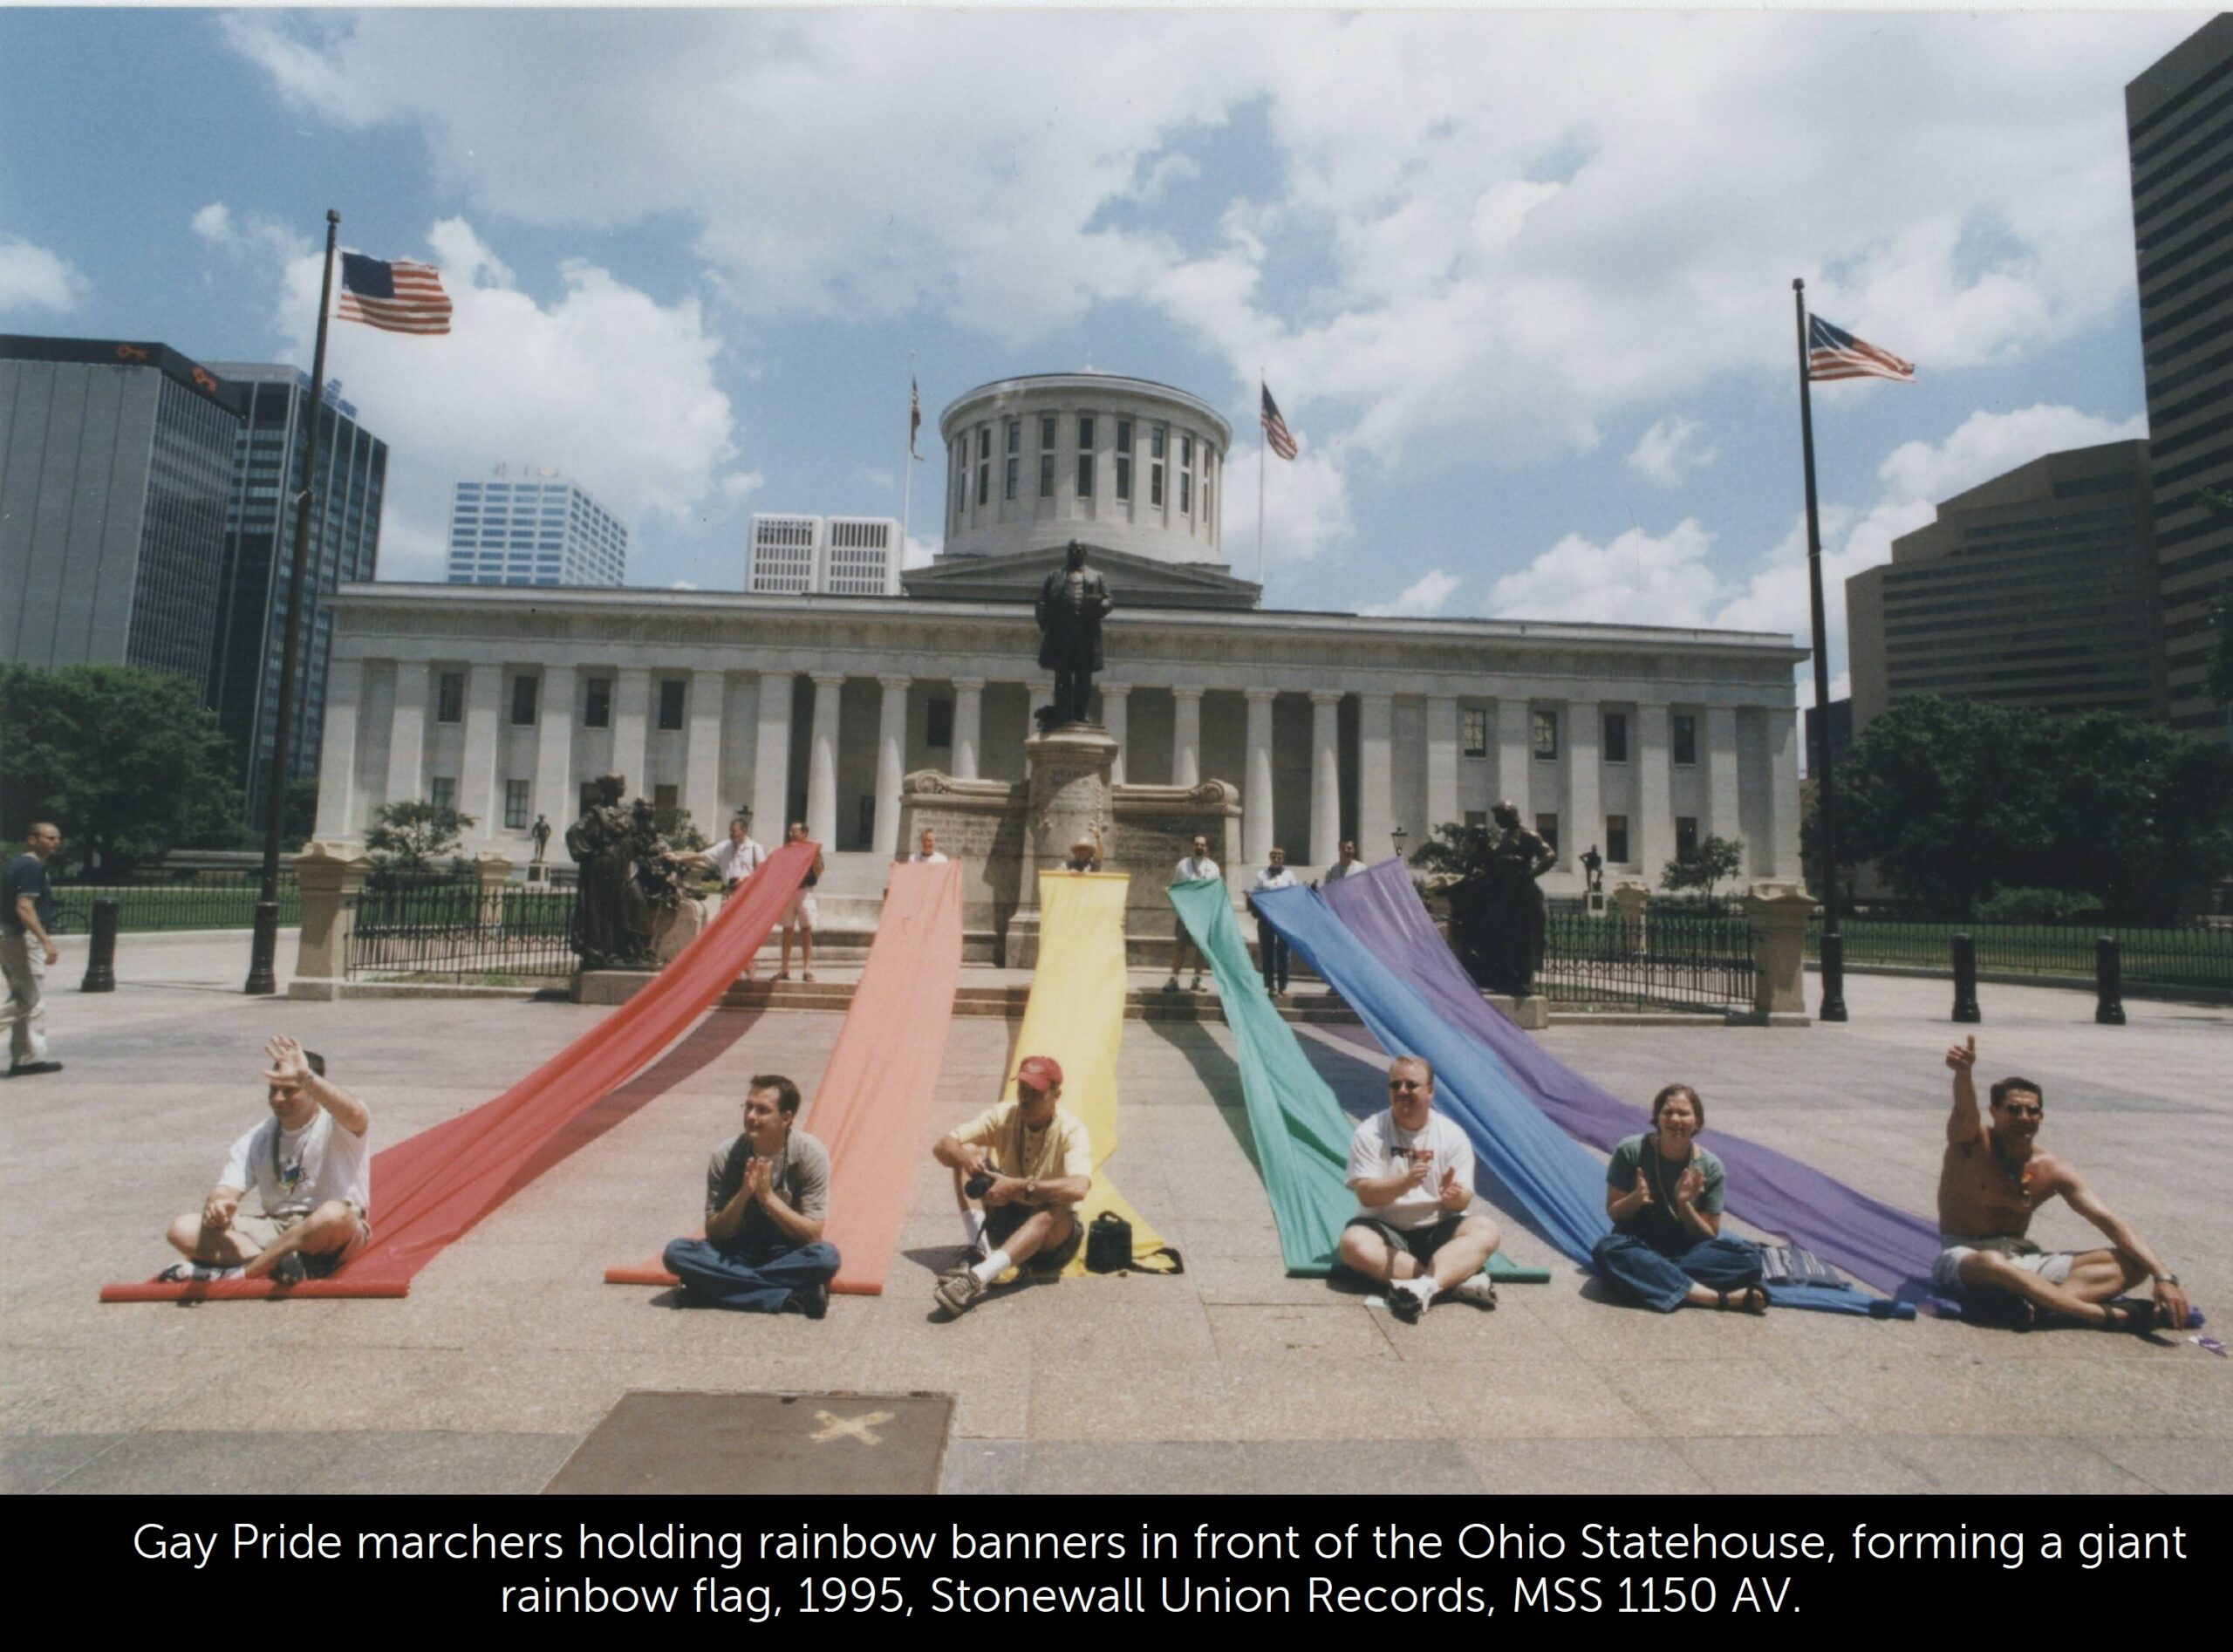 A photo of Gay Pride marchers holding rainbow banners in front of the Ohio Statehouse, forming a giant rainbow flag.